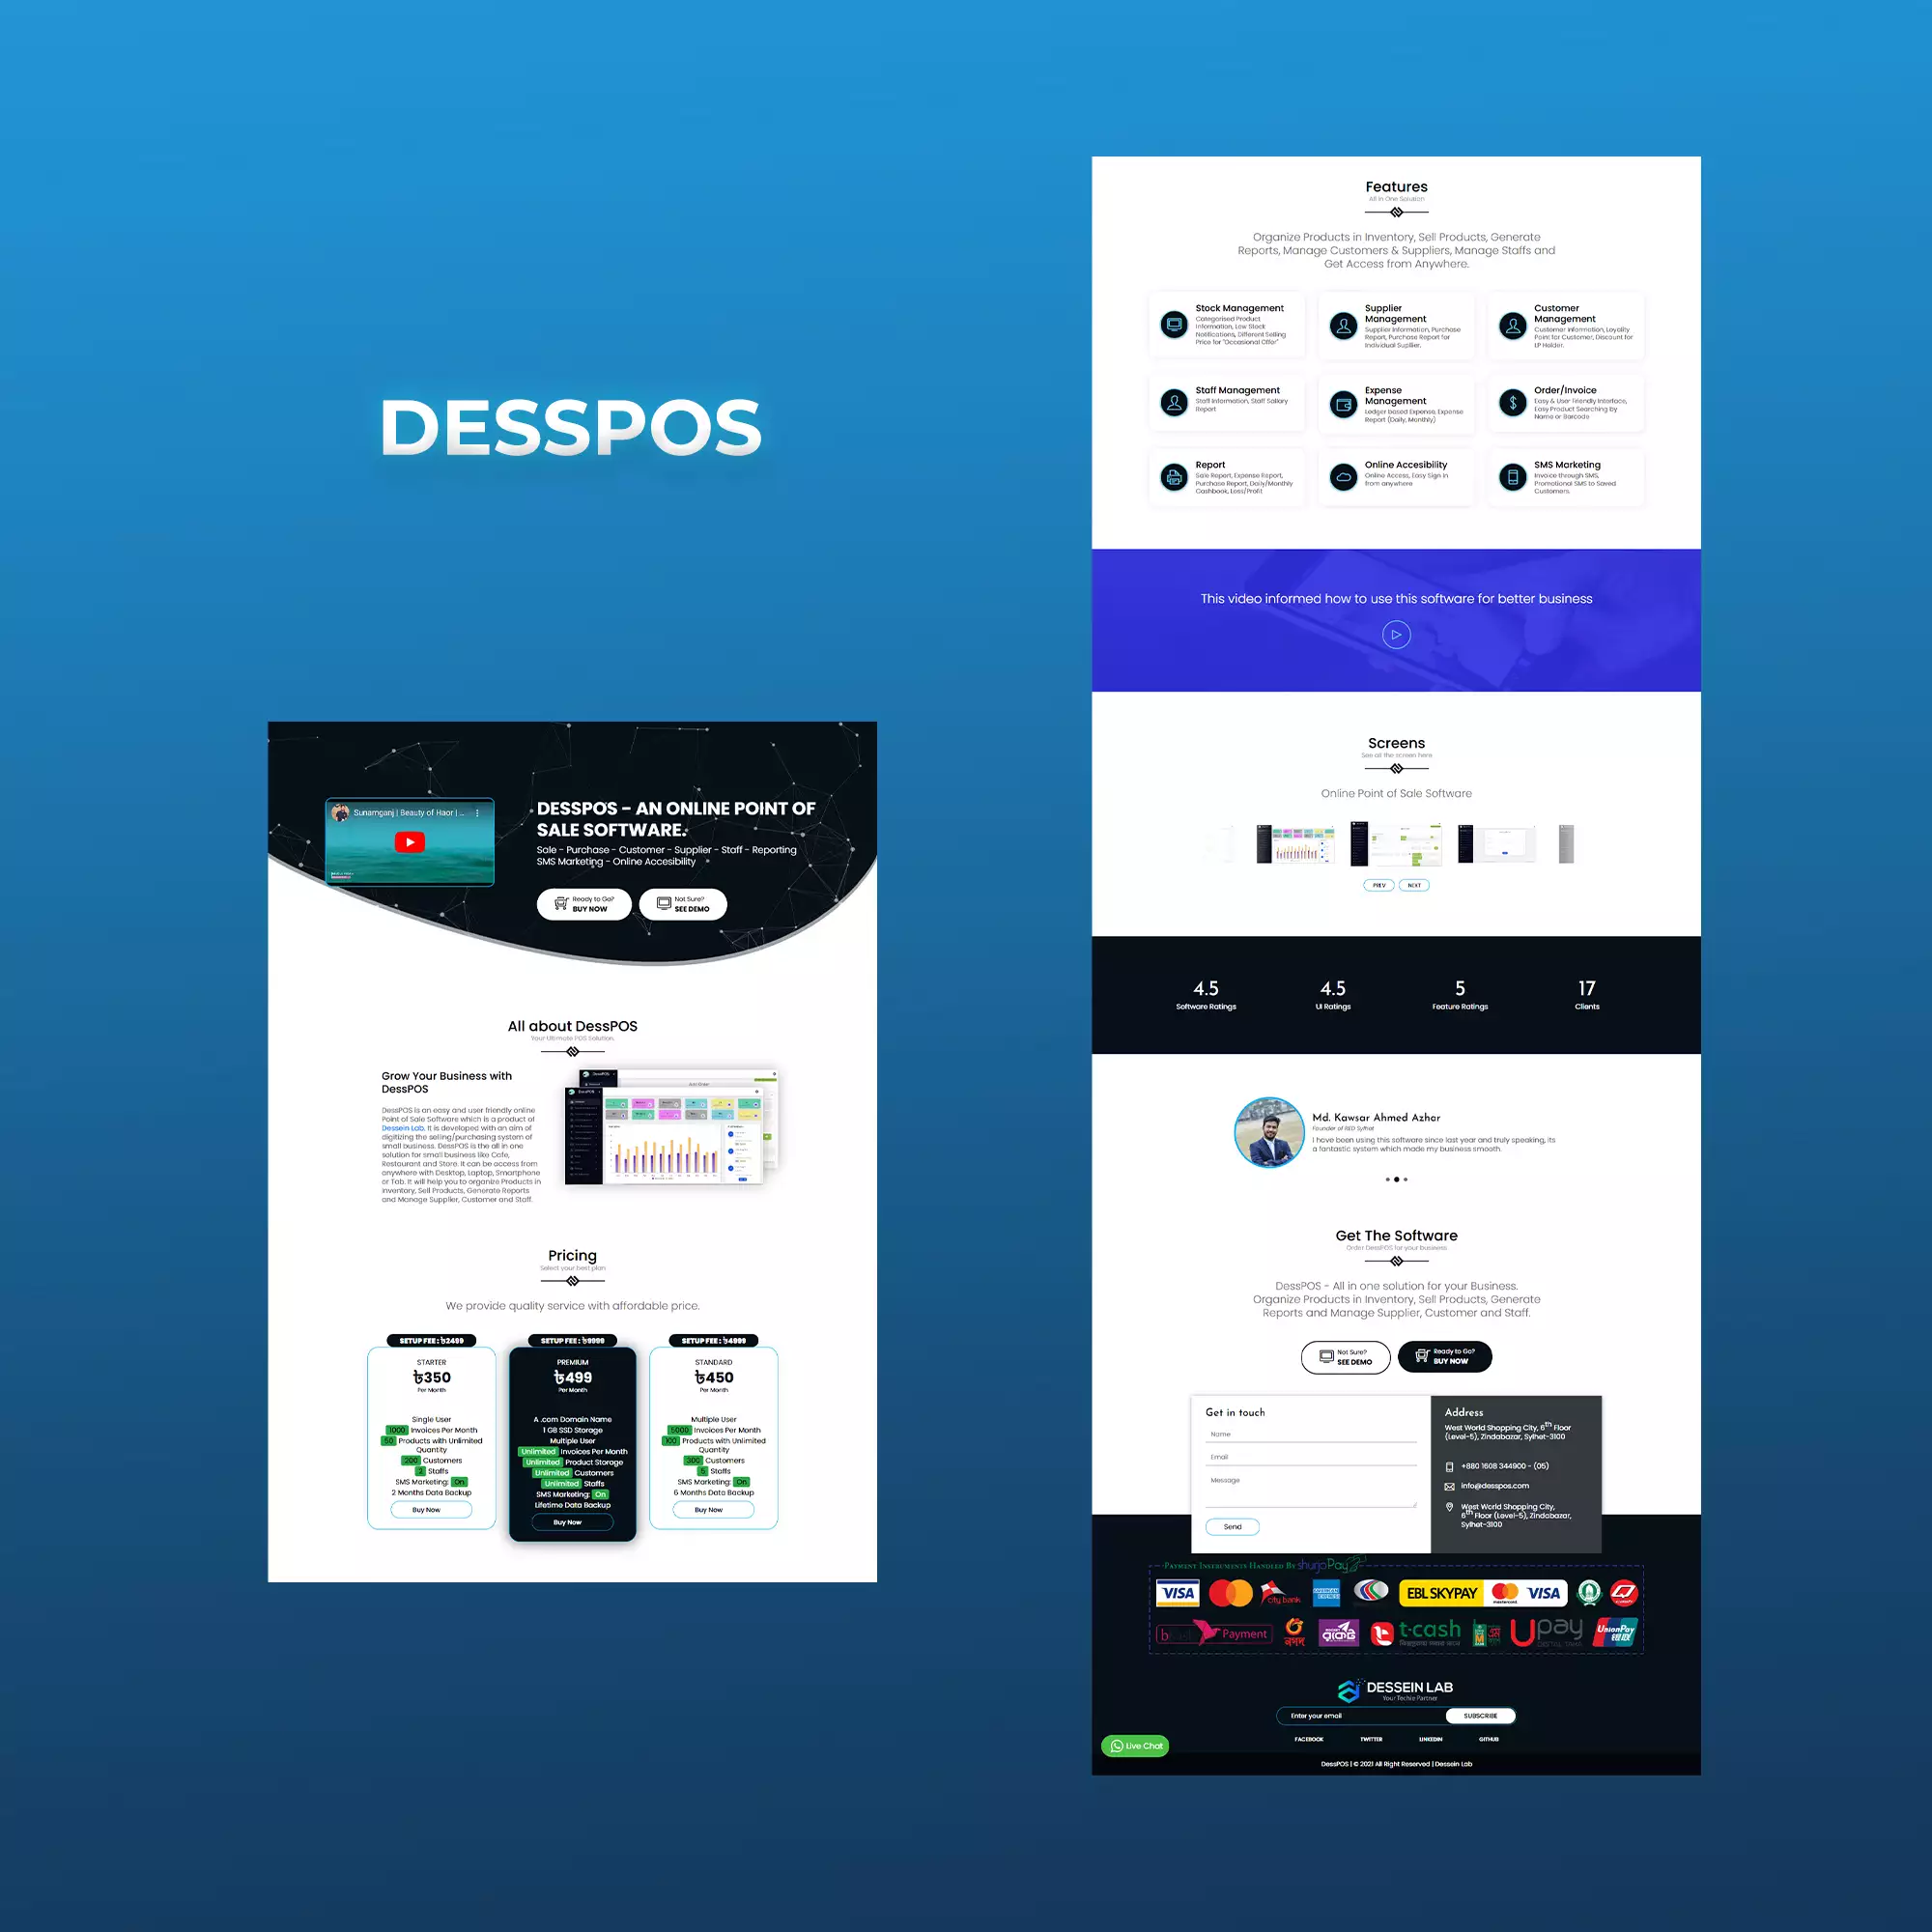 Desspos - An Online Point of Sale Software